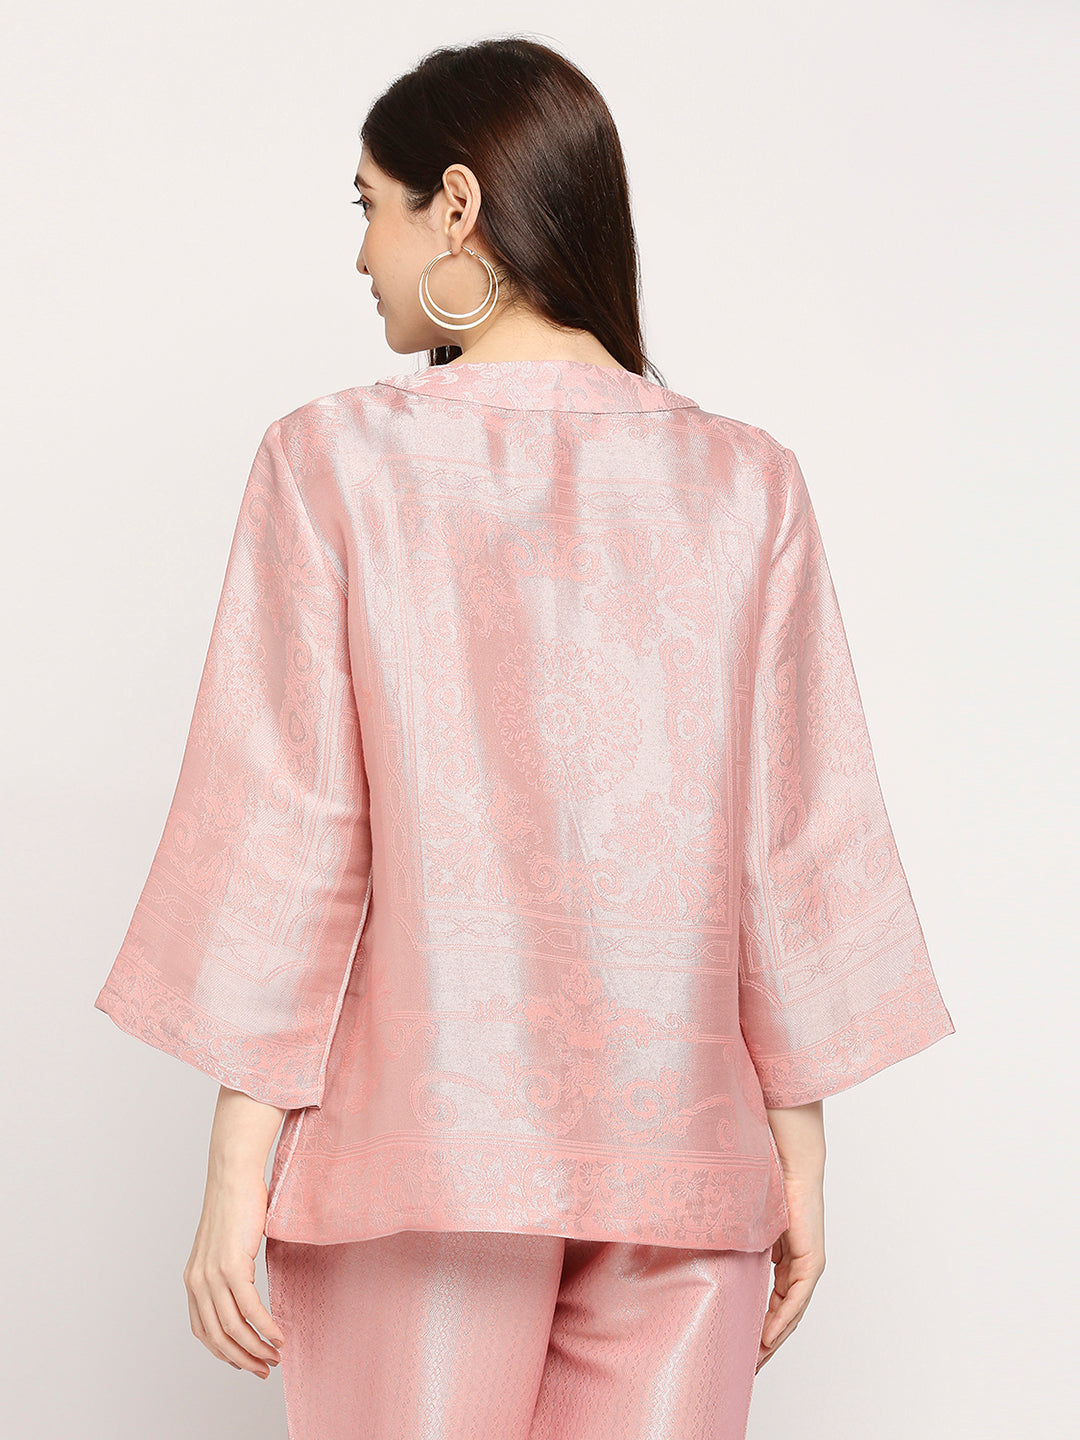 Brocade Peach French Patterned Jacket